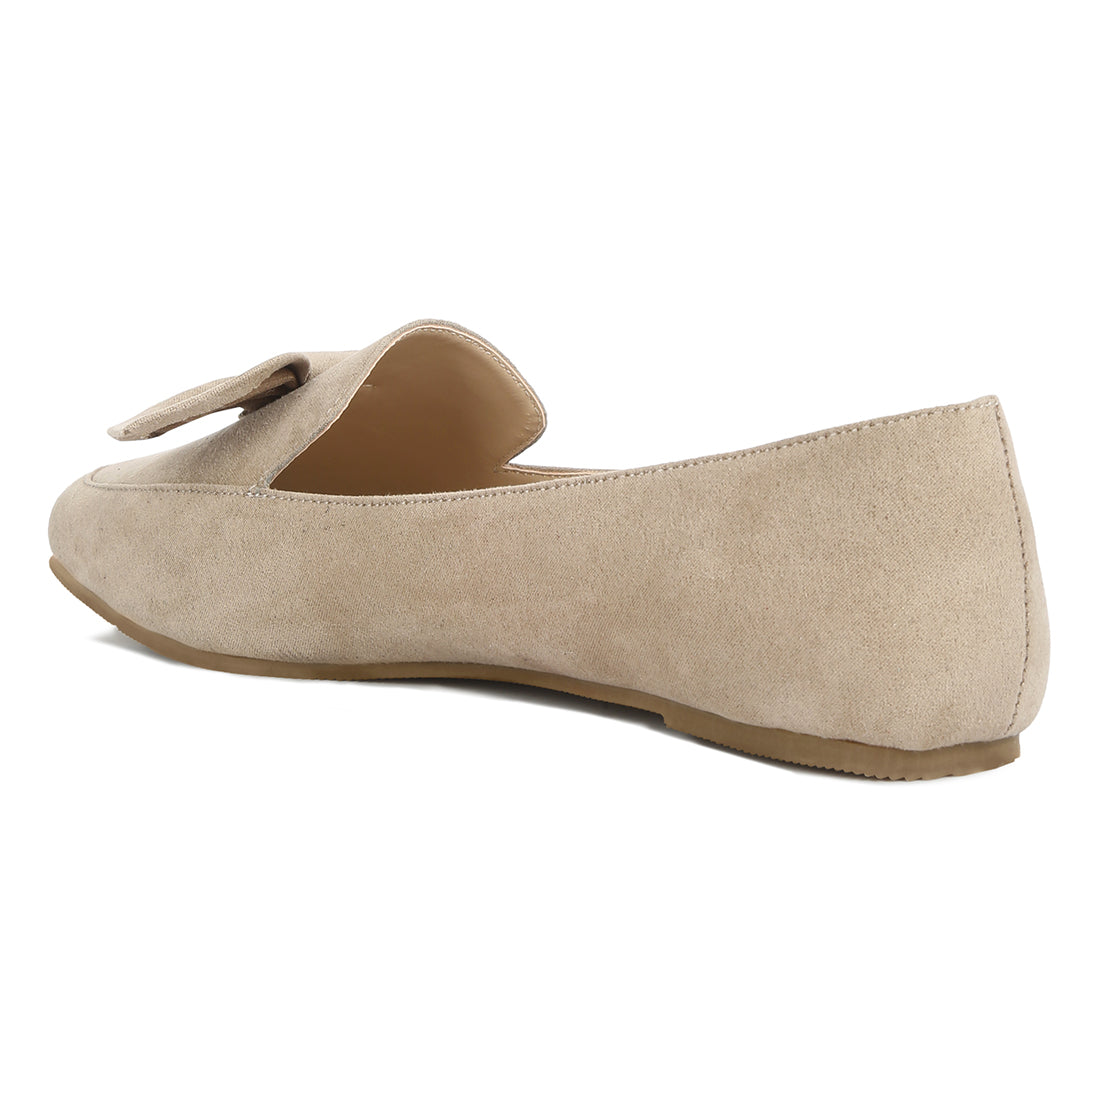 Beige Casual Loafer with Bow